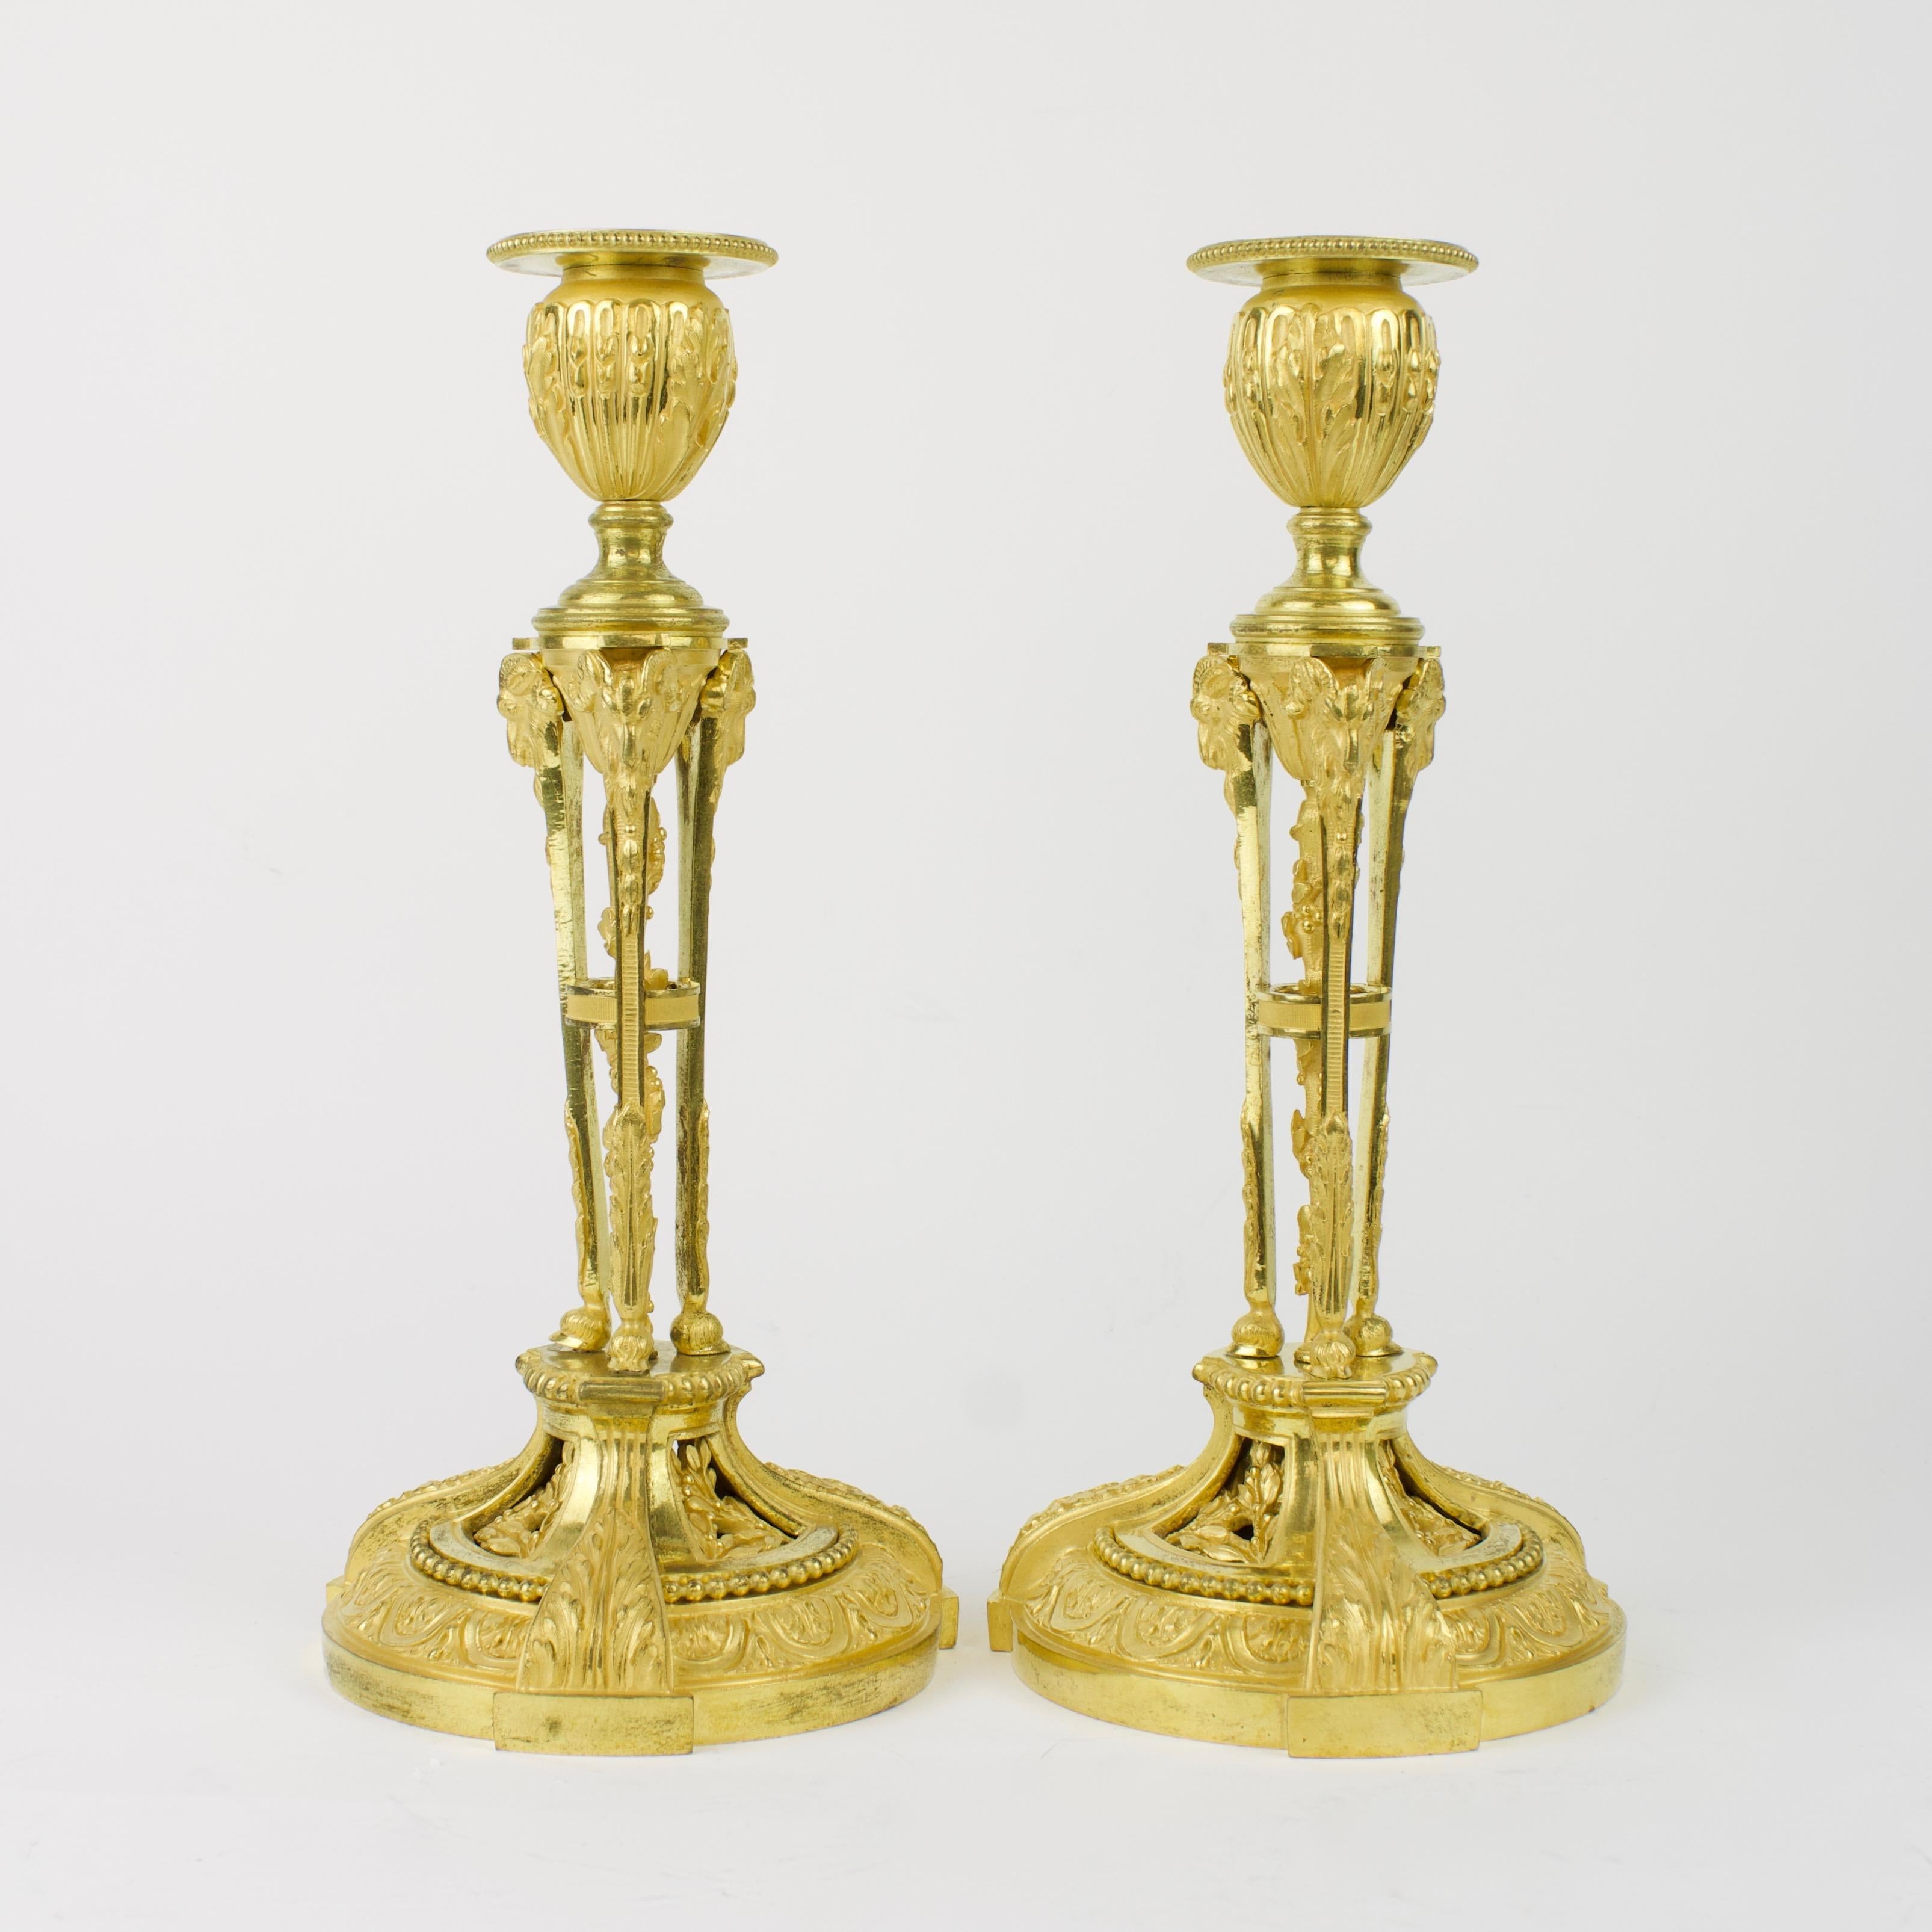 French Pair of Early 19th Century Louis XVI Gilt Bronze Candlesticks after Martincourt For Sale